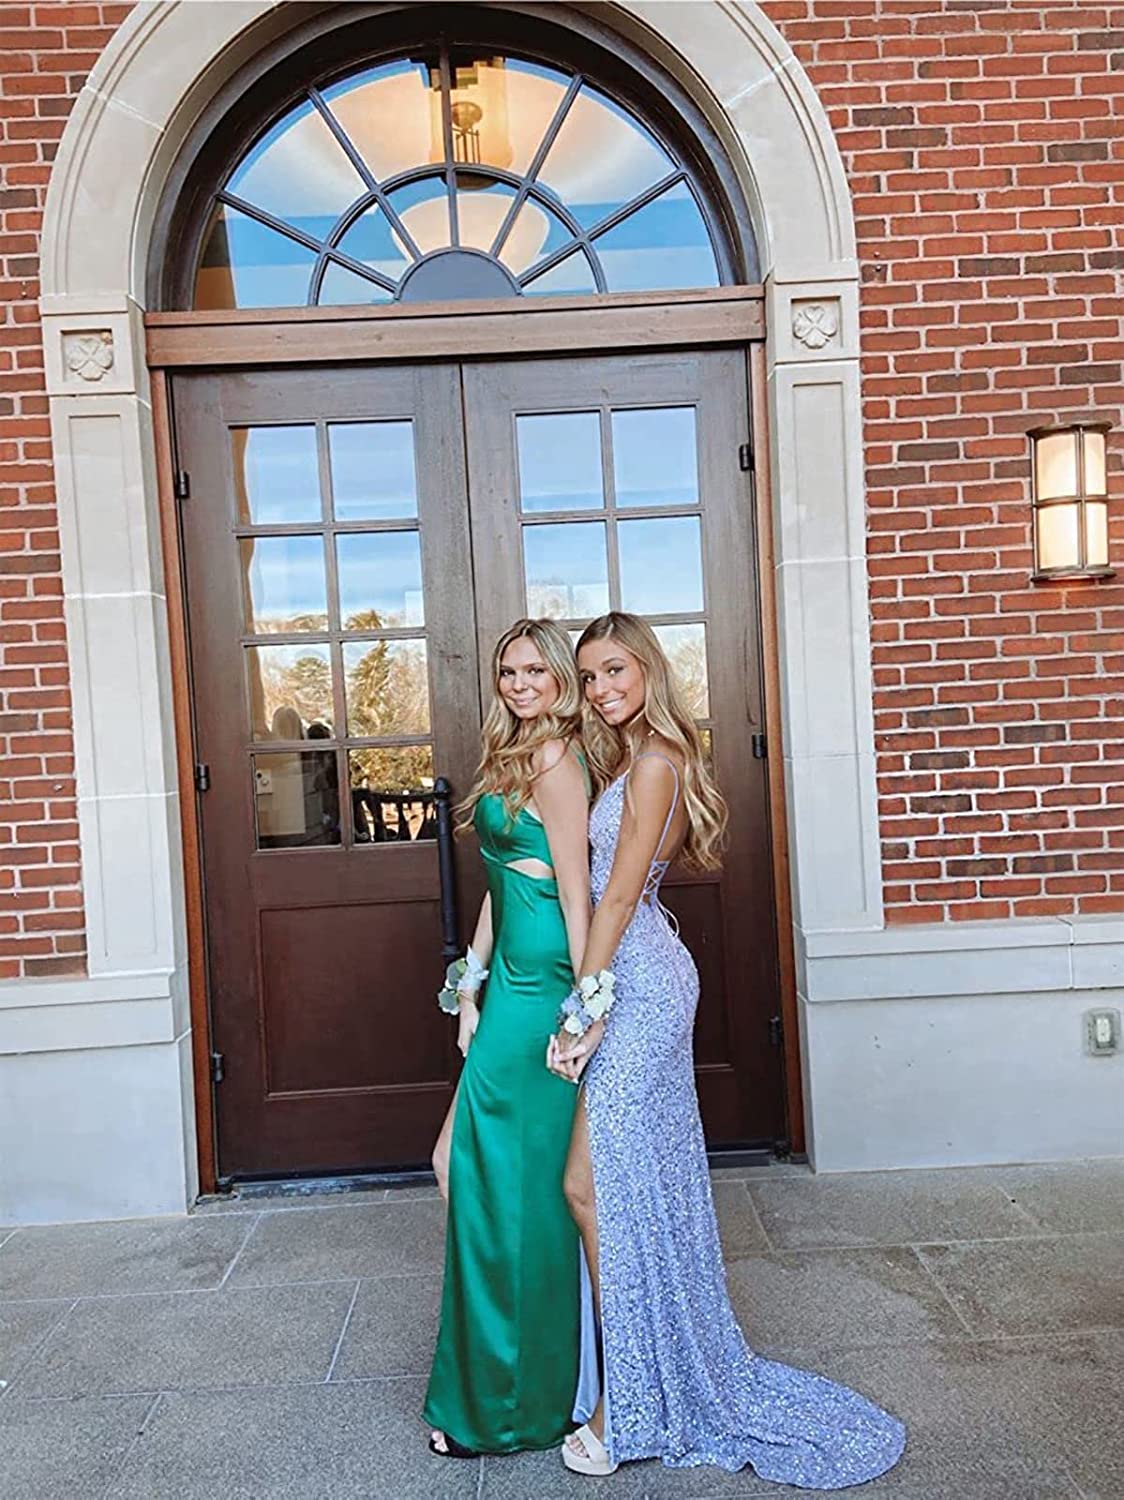 PM365,Glitter Mermaid V Neck Cross Back Blue Sequin Prom Dresses with Slit,Cross Back Tight Evening Party Gown